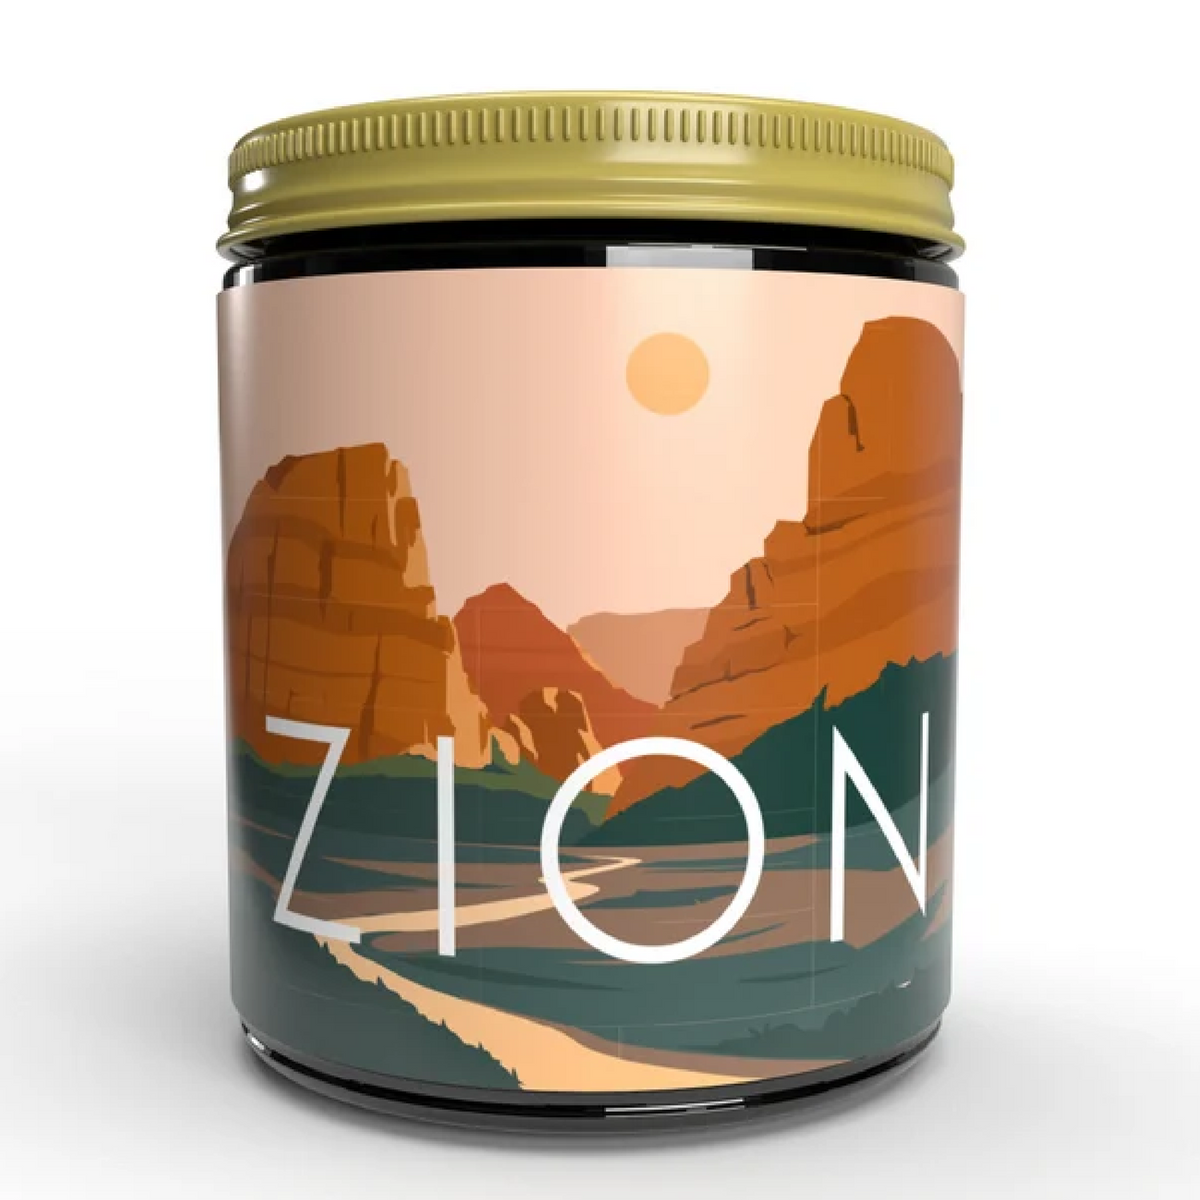 Zion National Park Soy Wax Candle - 9oz